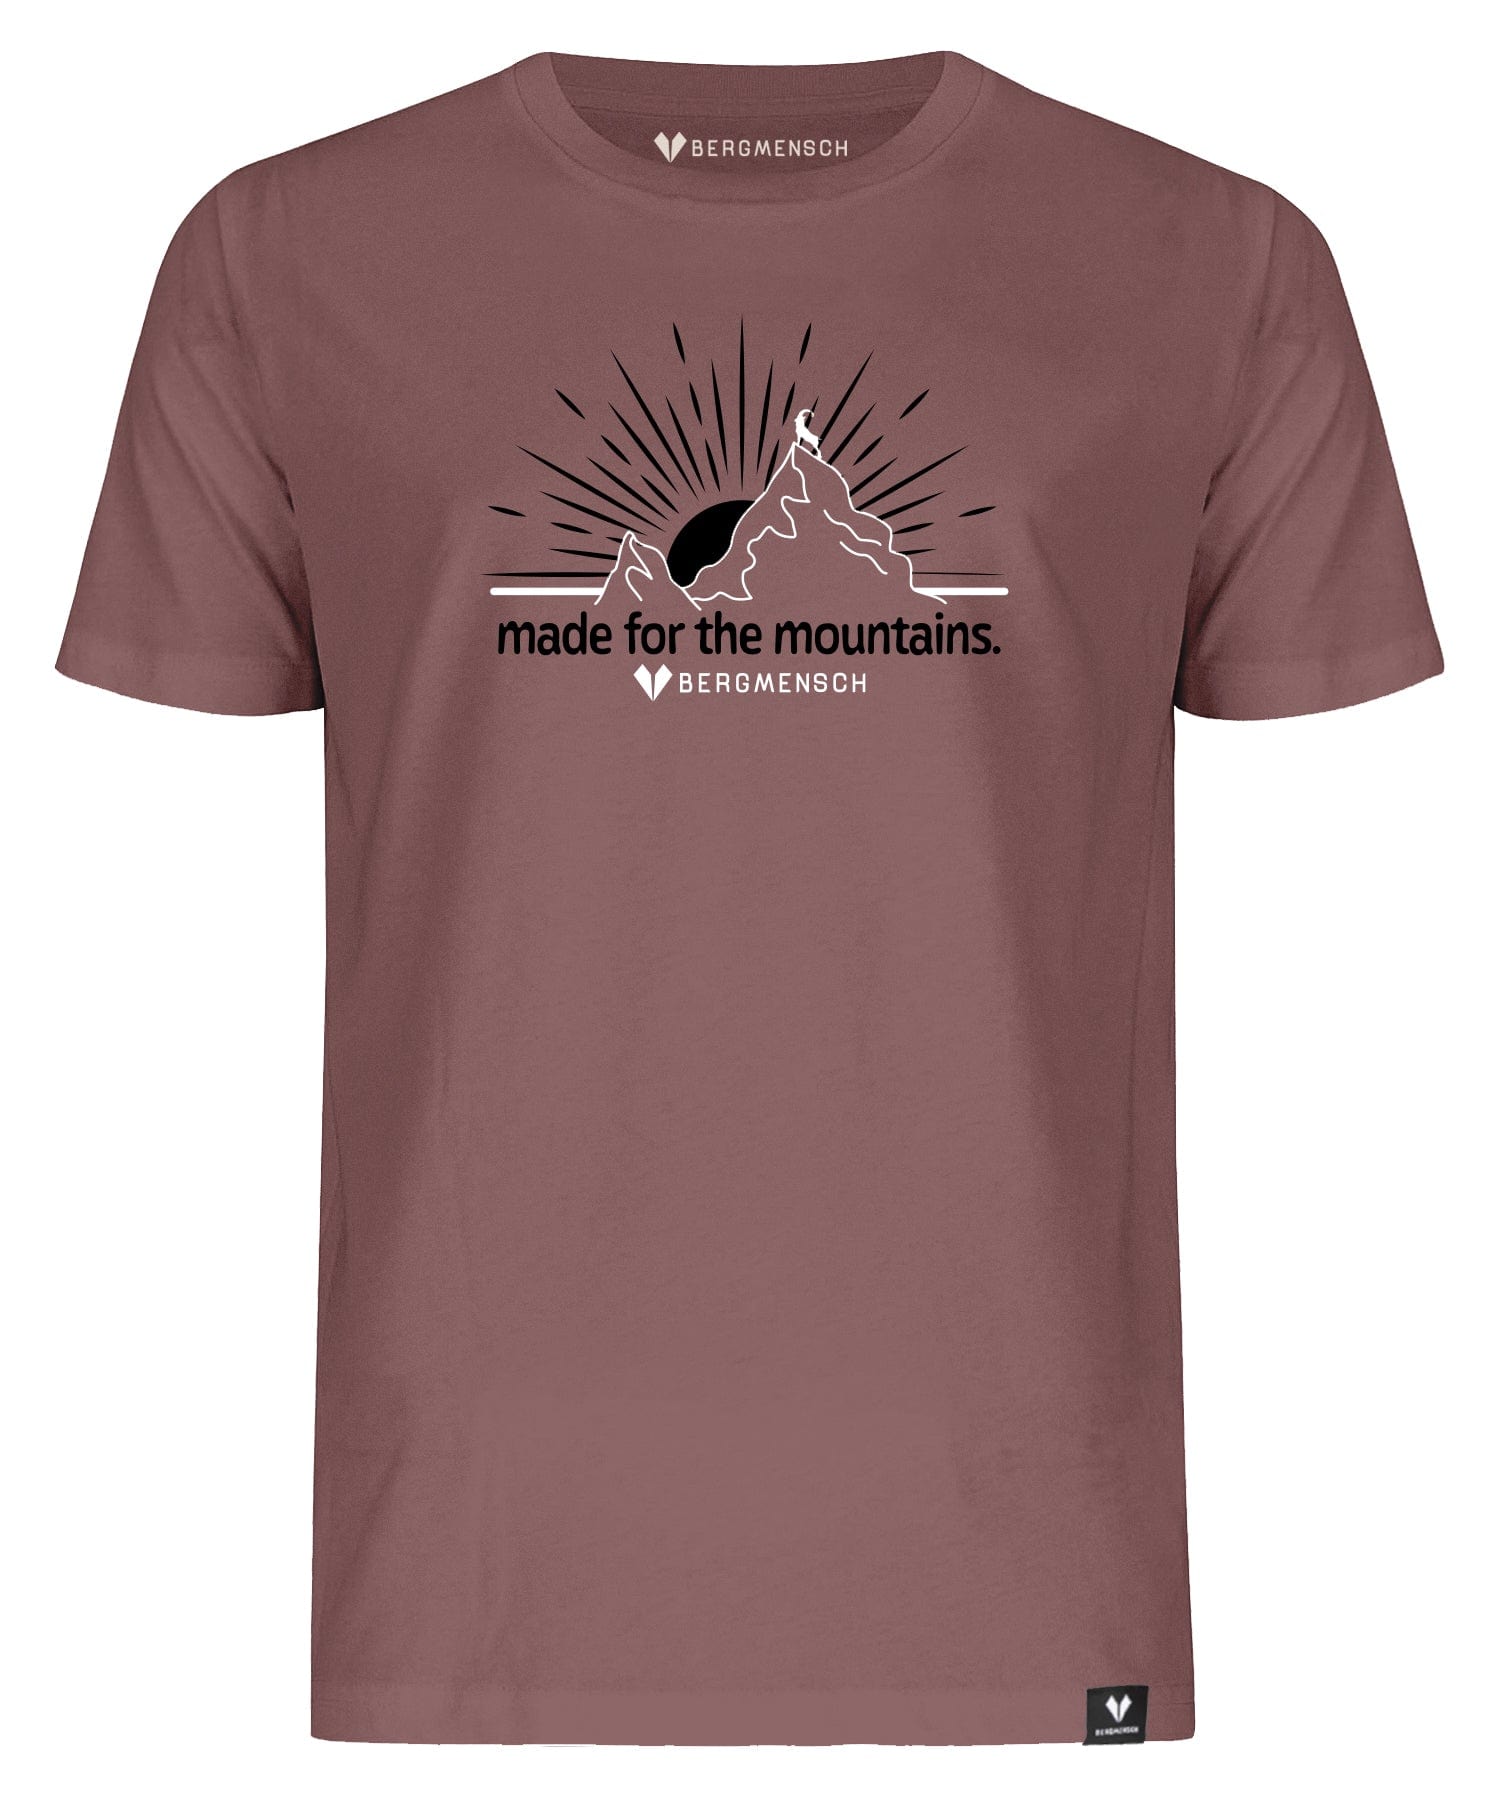 Made for the mountains - Unisex Premium Organic Shirt